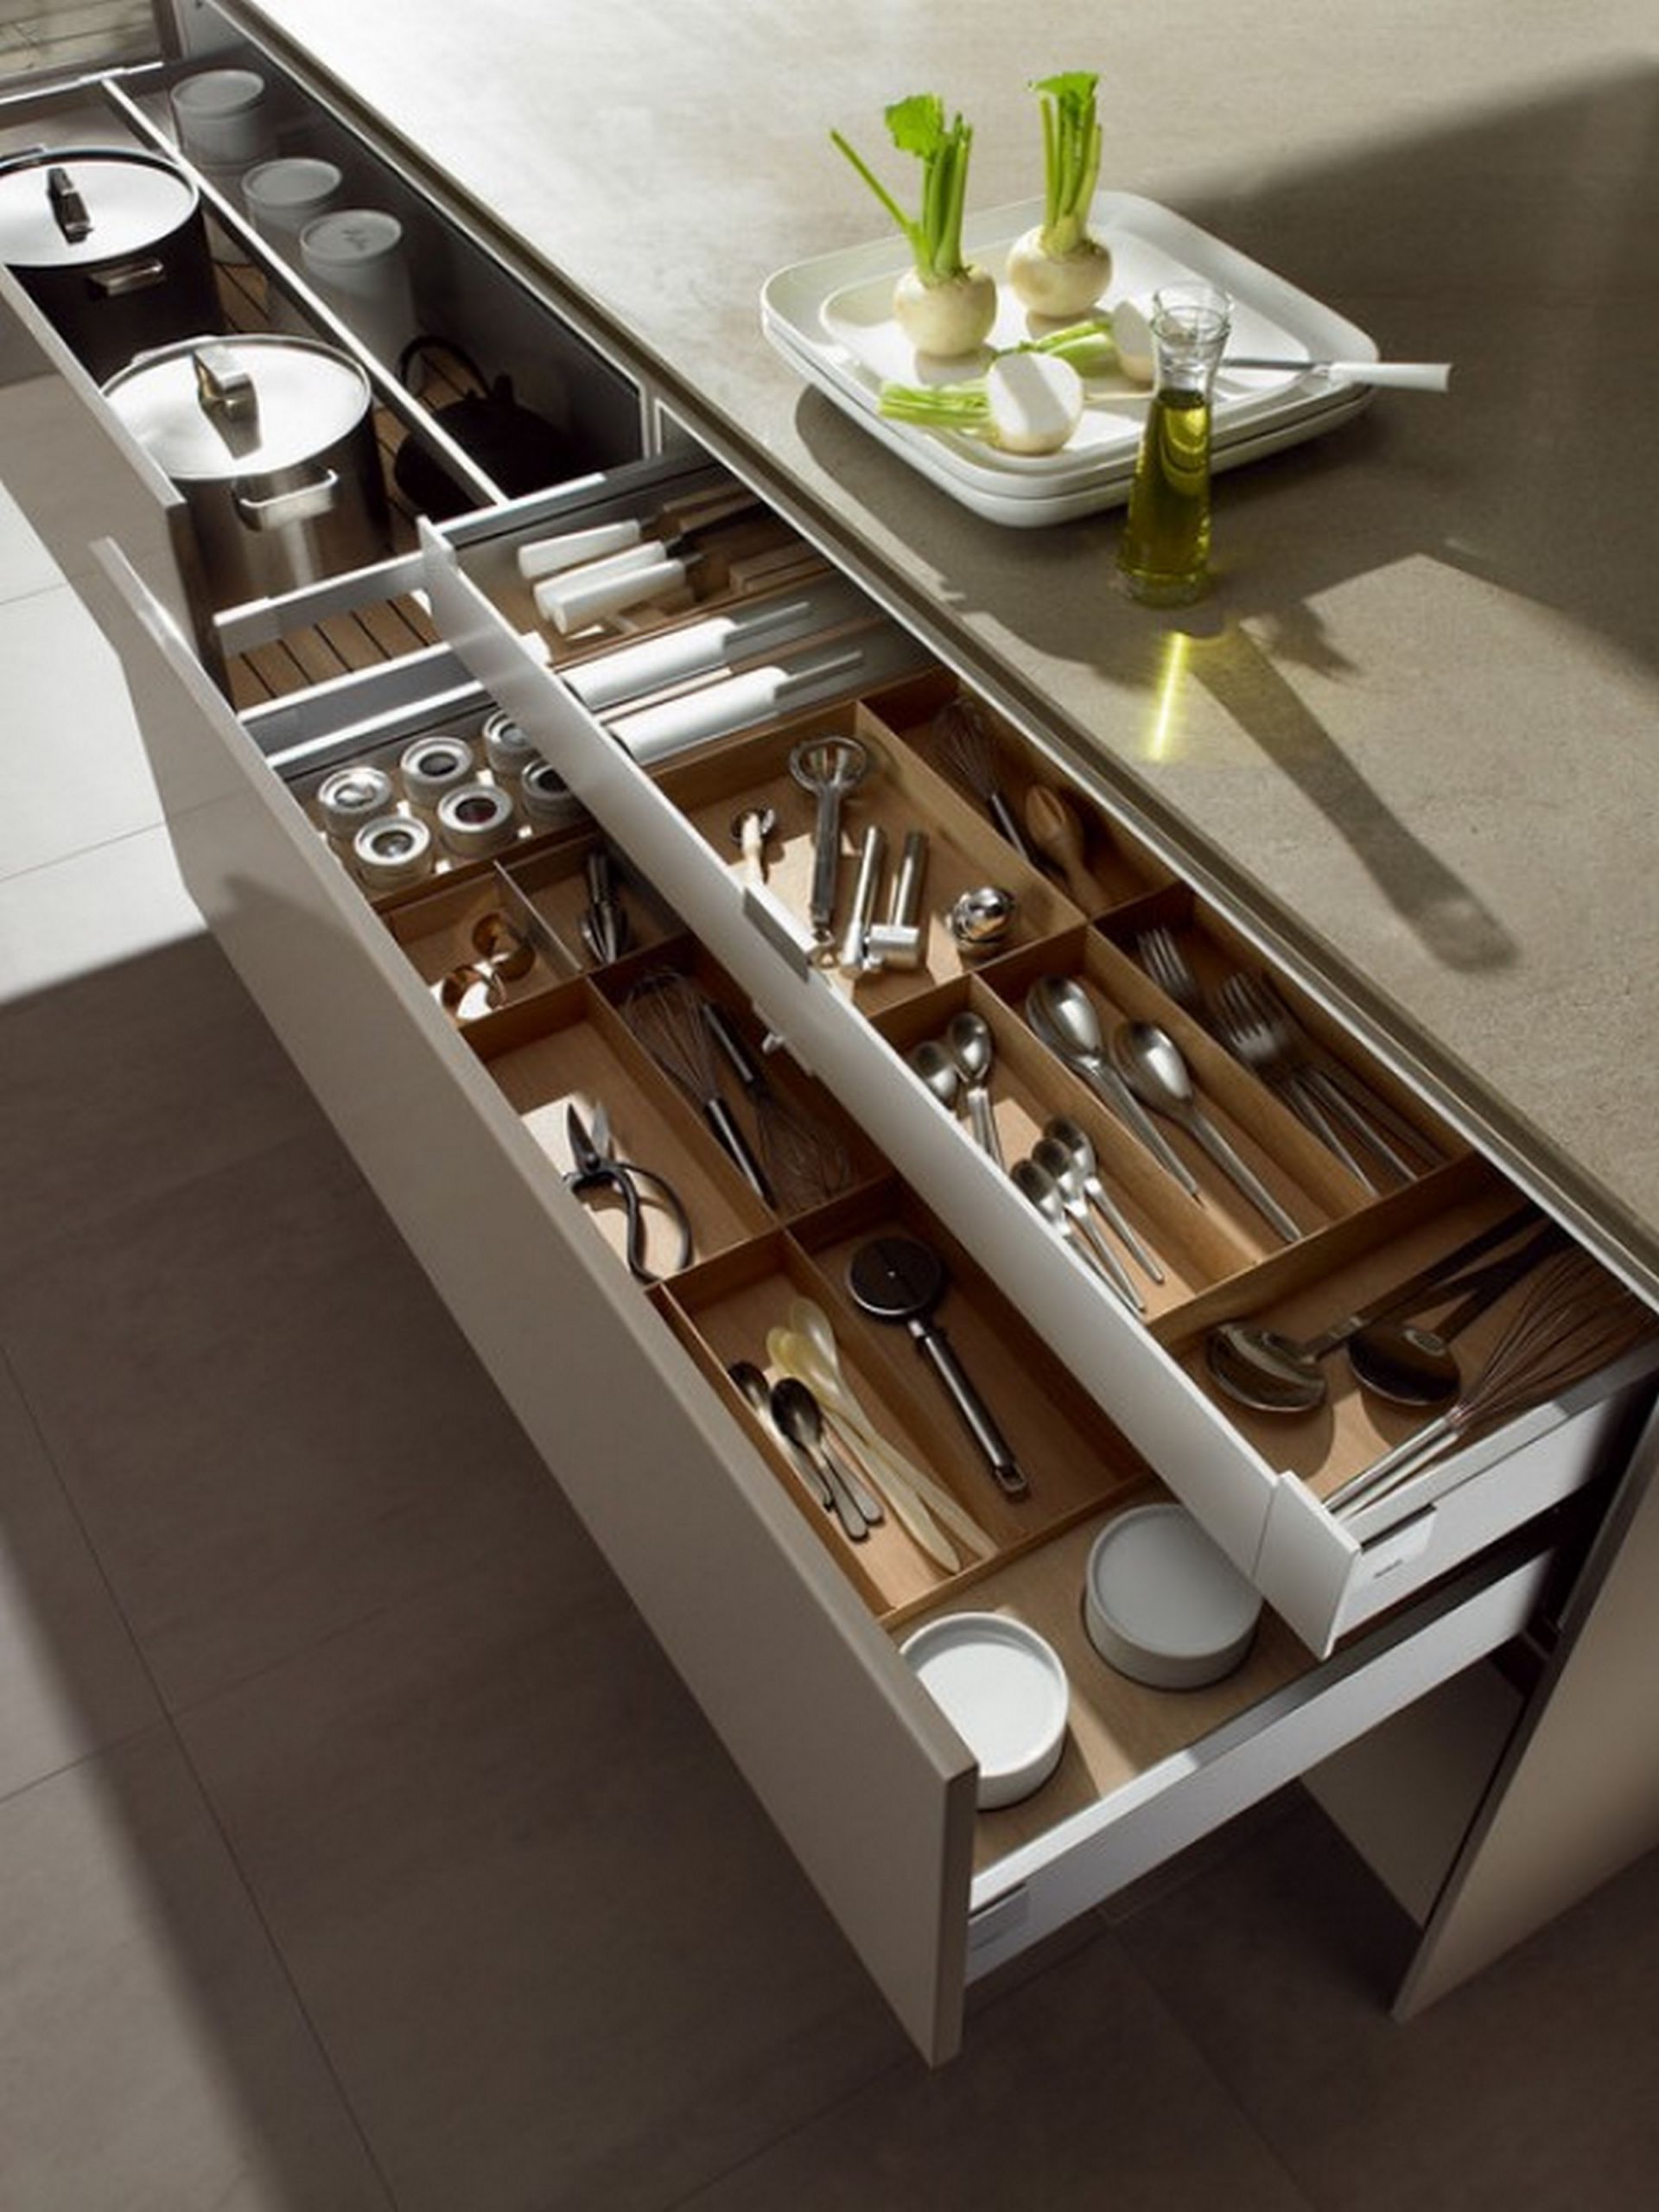 Kitchen Drawers Organizers
 Tips for Perfectly Organized Kitchen Drawers